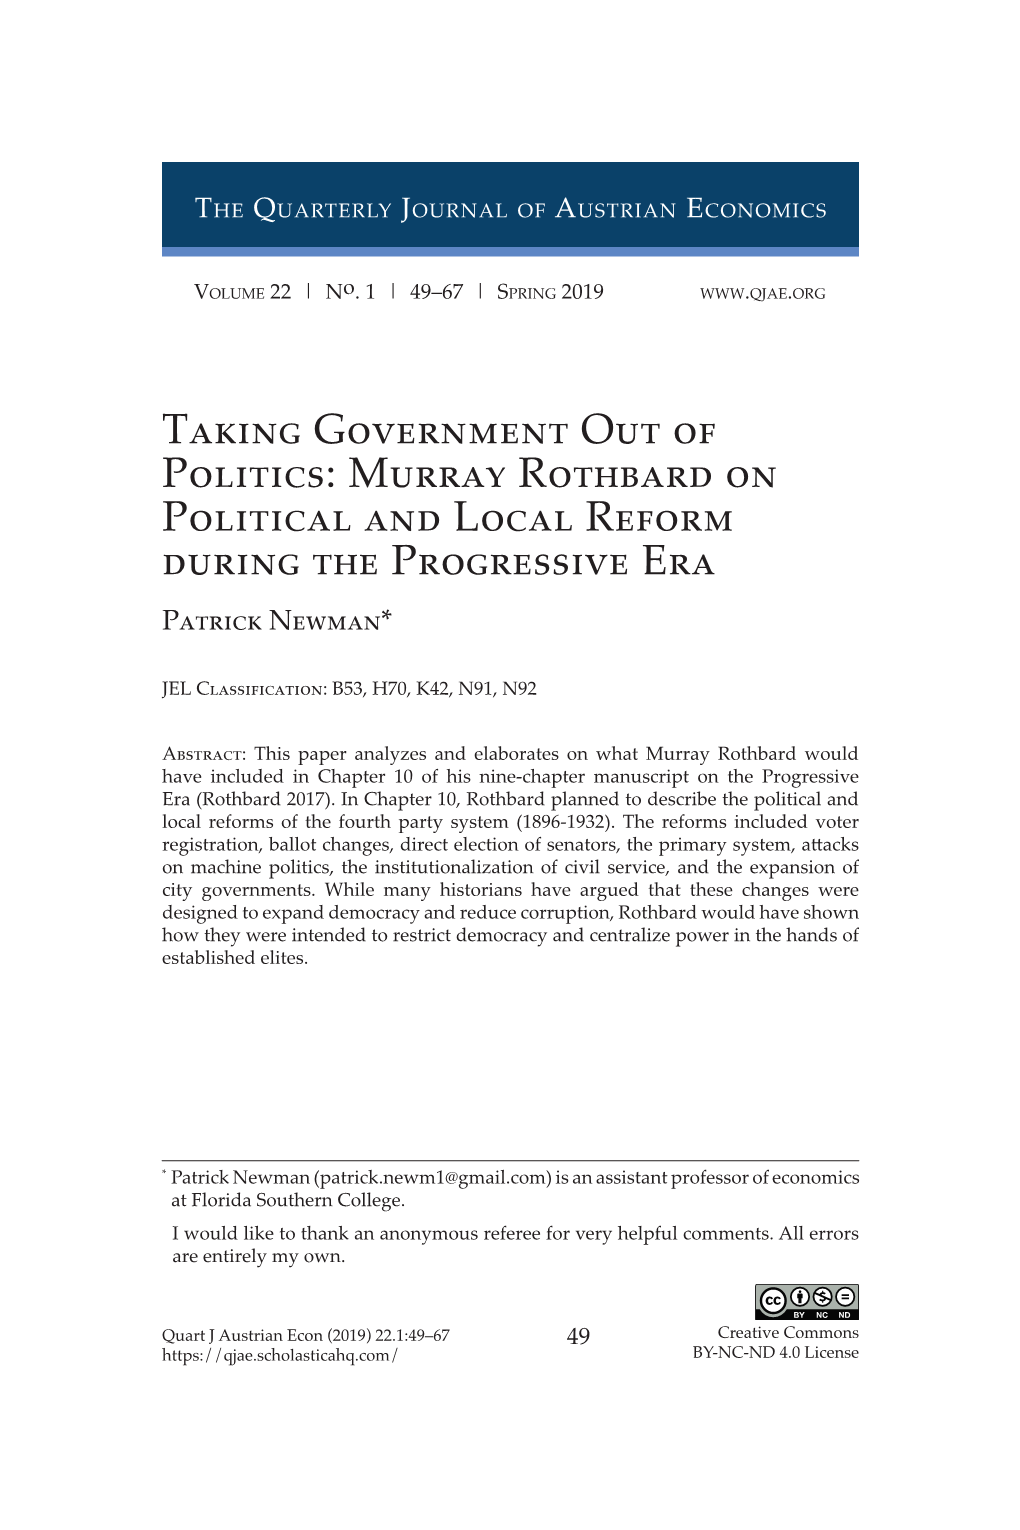 Taking Government out of Politics: Murray Rothbard on Political and Local Reform During the Progressive Era Patrick Newman*